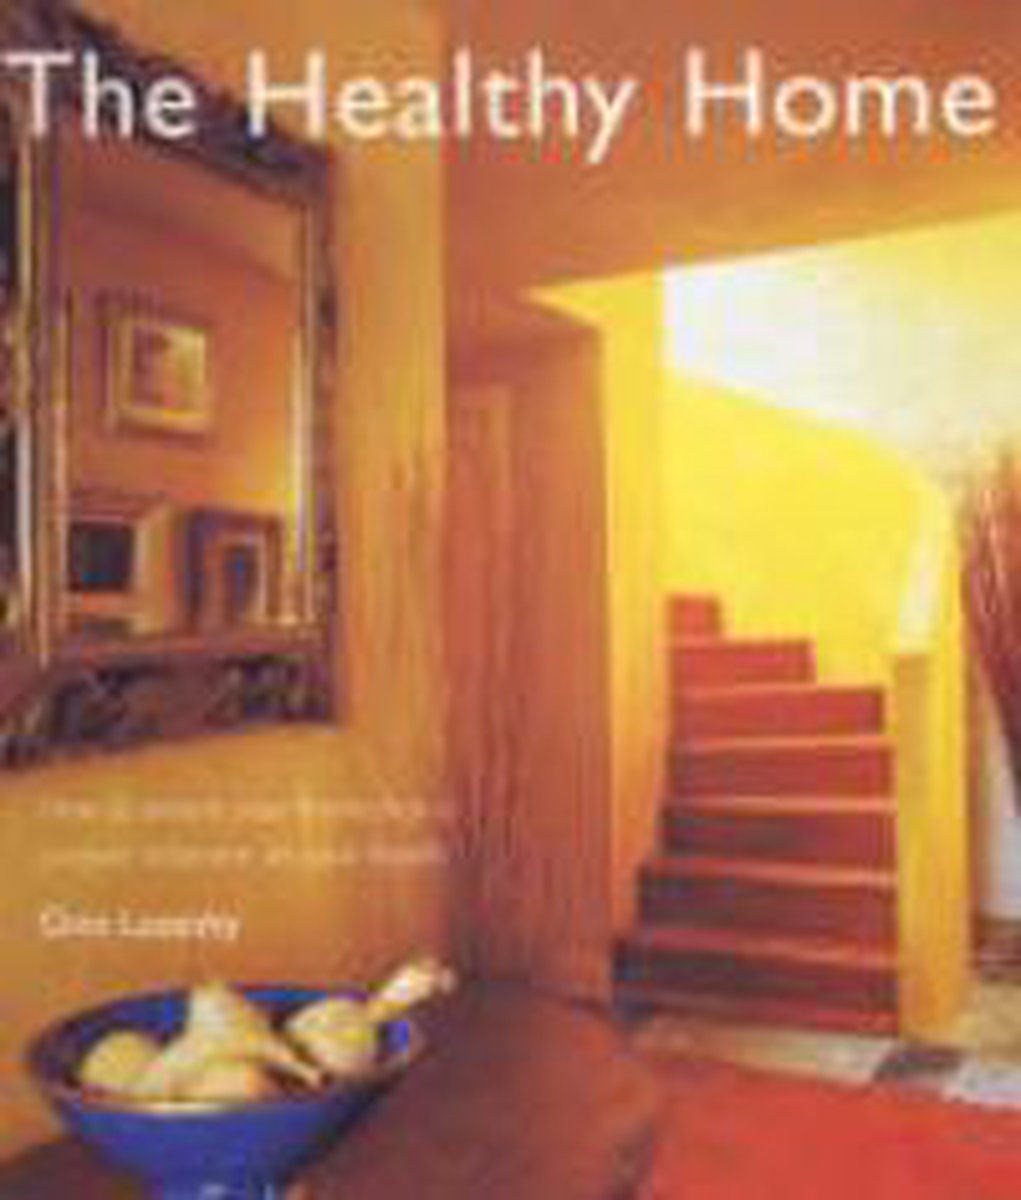 Healthy home, the (gina lazenby)